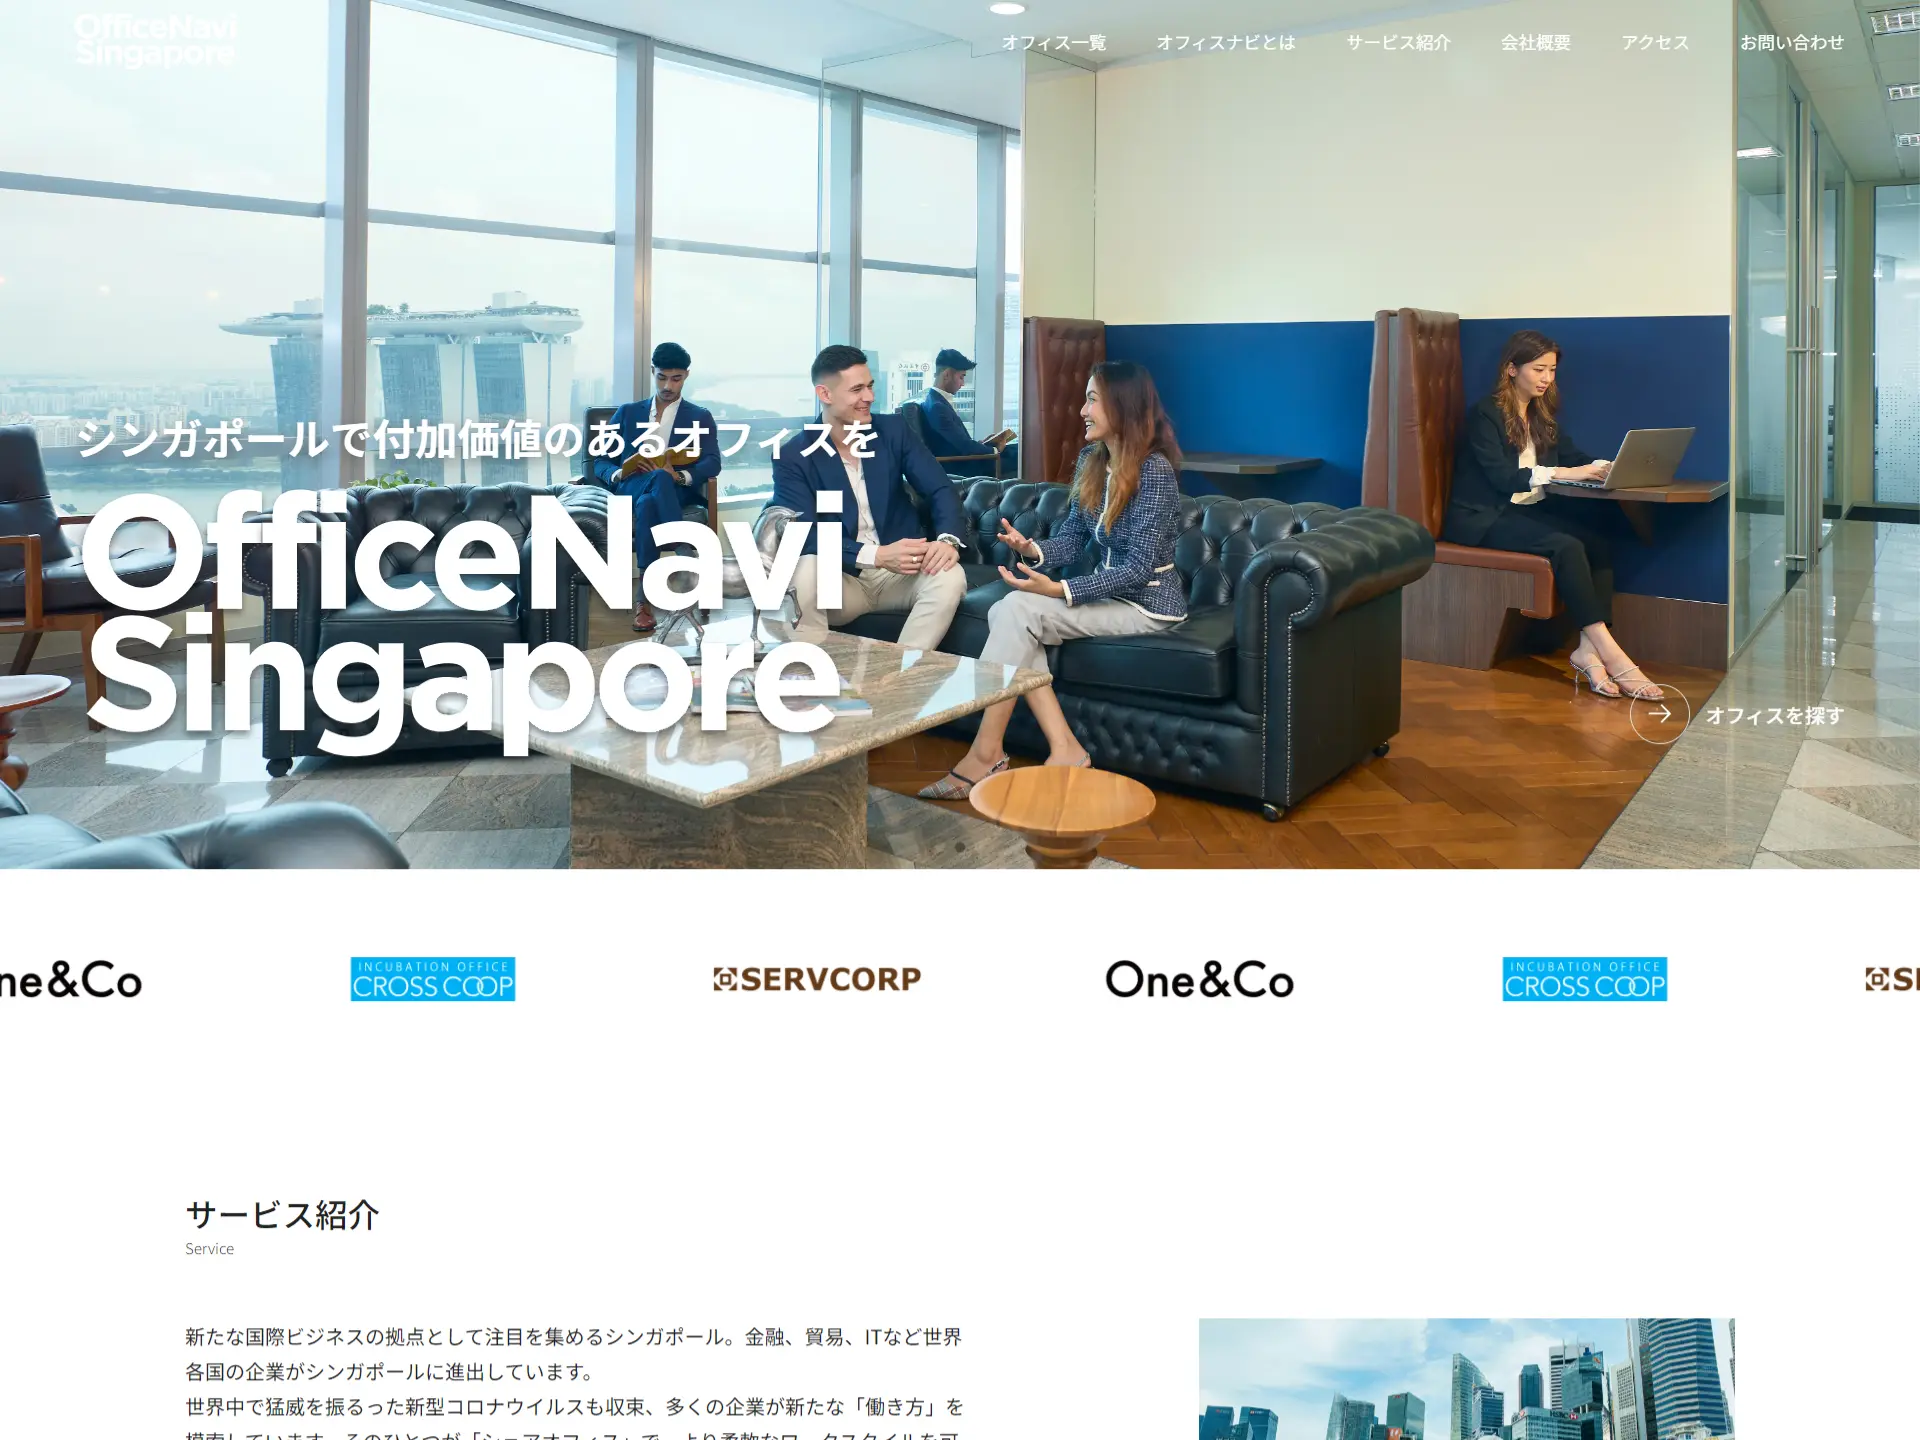 OFFICE NAVI CO.LTD. Expands Its Reach with a New Subsidiary and Website in Singapore